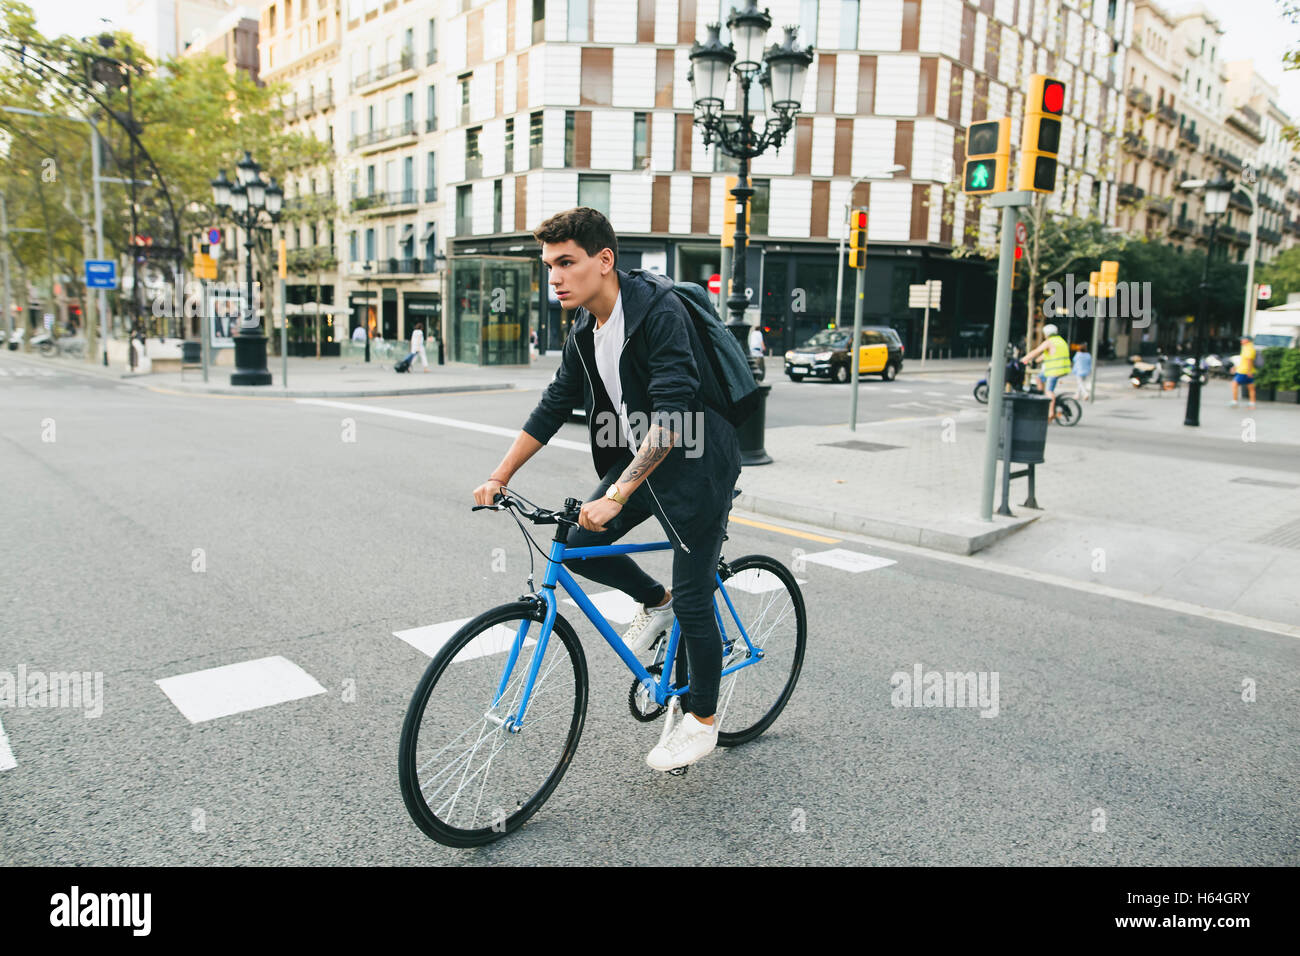 Teenager with a fixie bike in the city Stock Photo